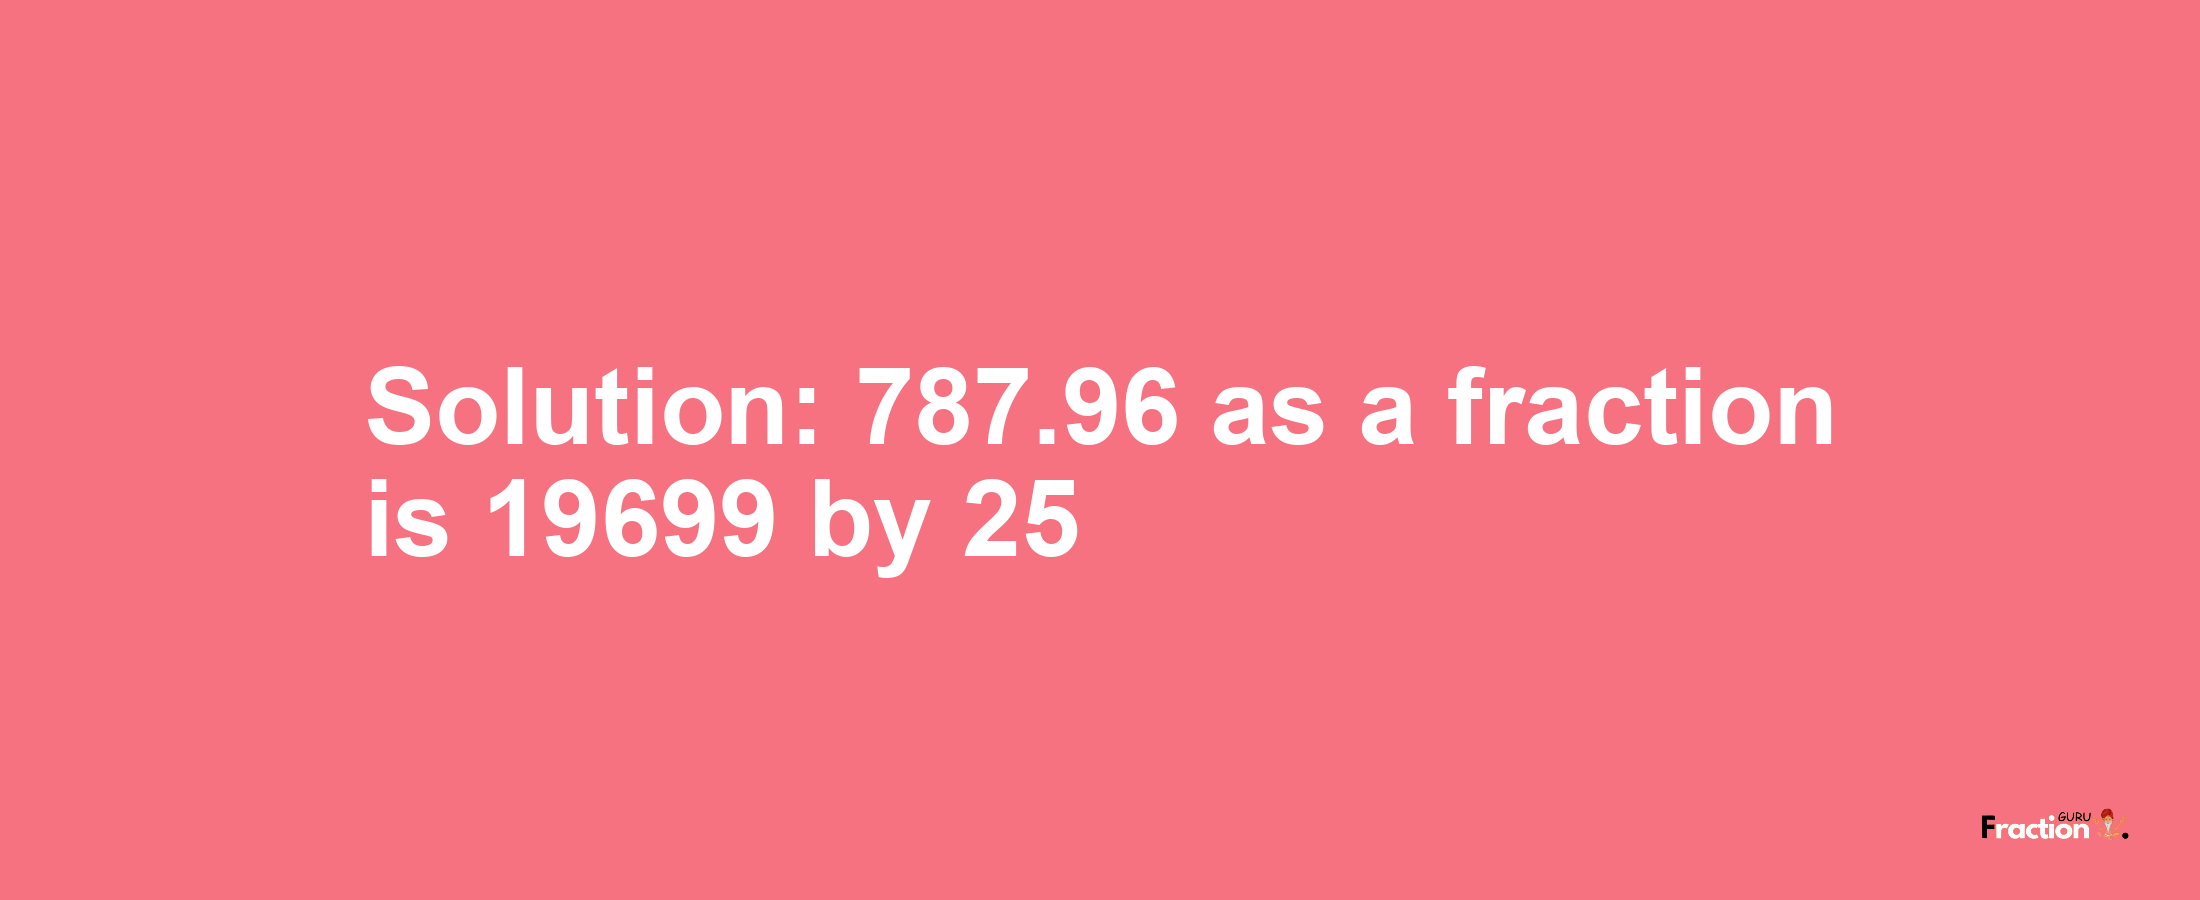 Solution:787.96 as a fraction is 19699/25